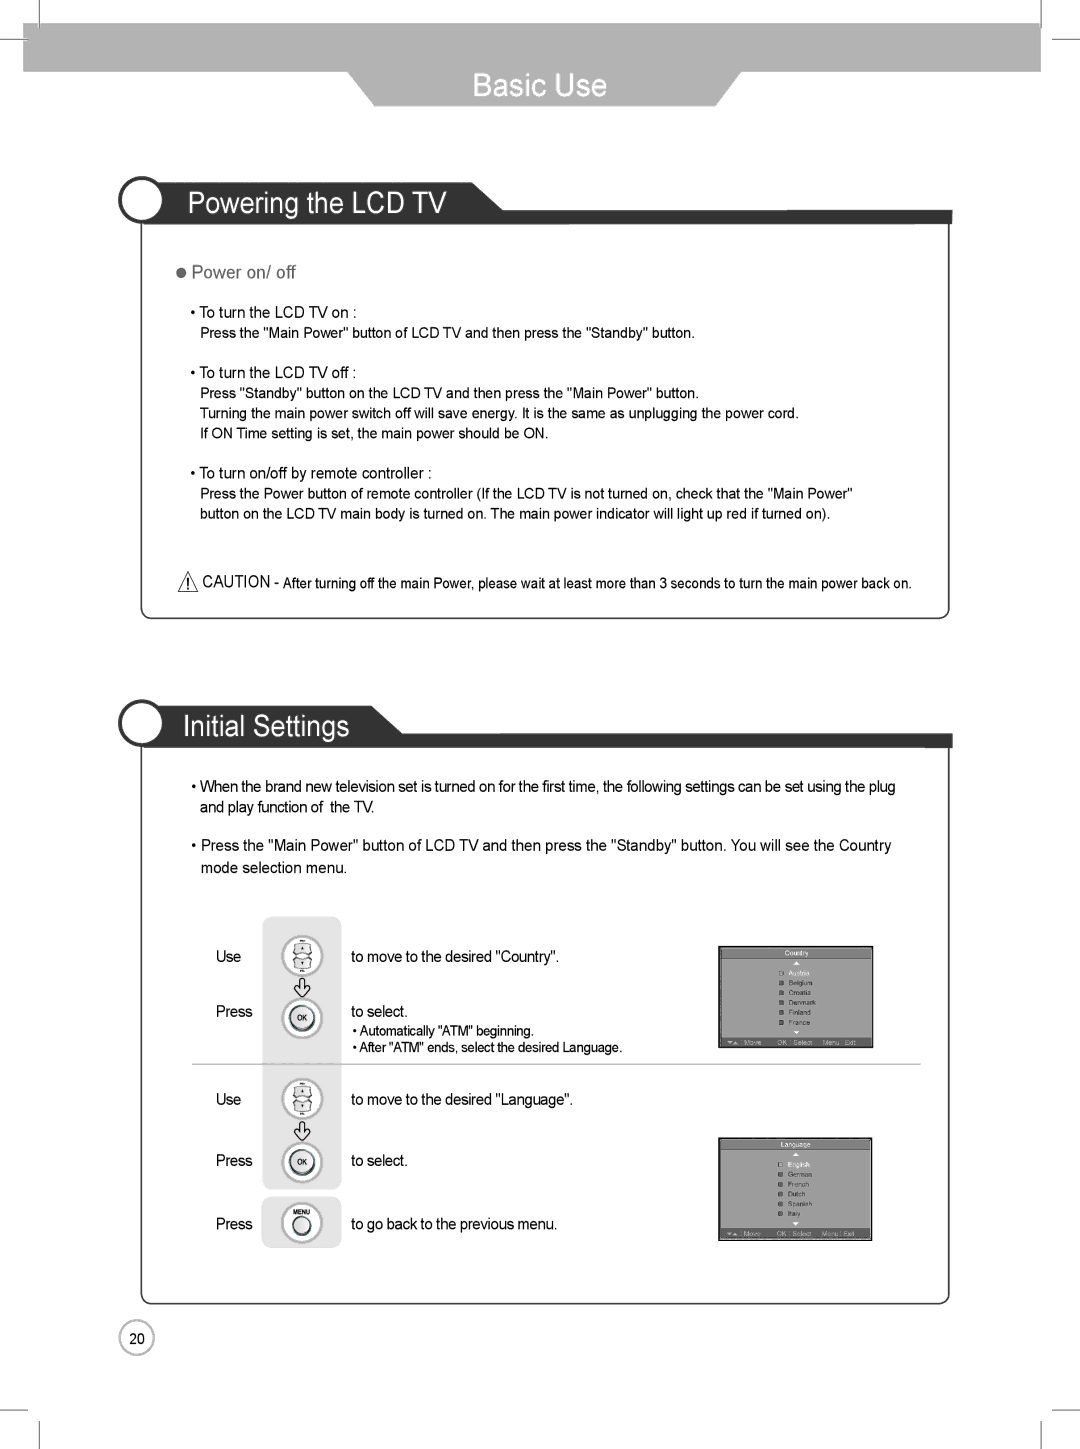 Daewoo DLP-3022, DLP-2622 user manual Basic Use, Powering the LCD TV, Initial Settings, ・ Power on/ off 